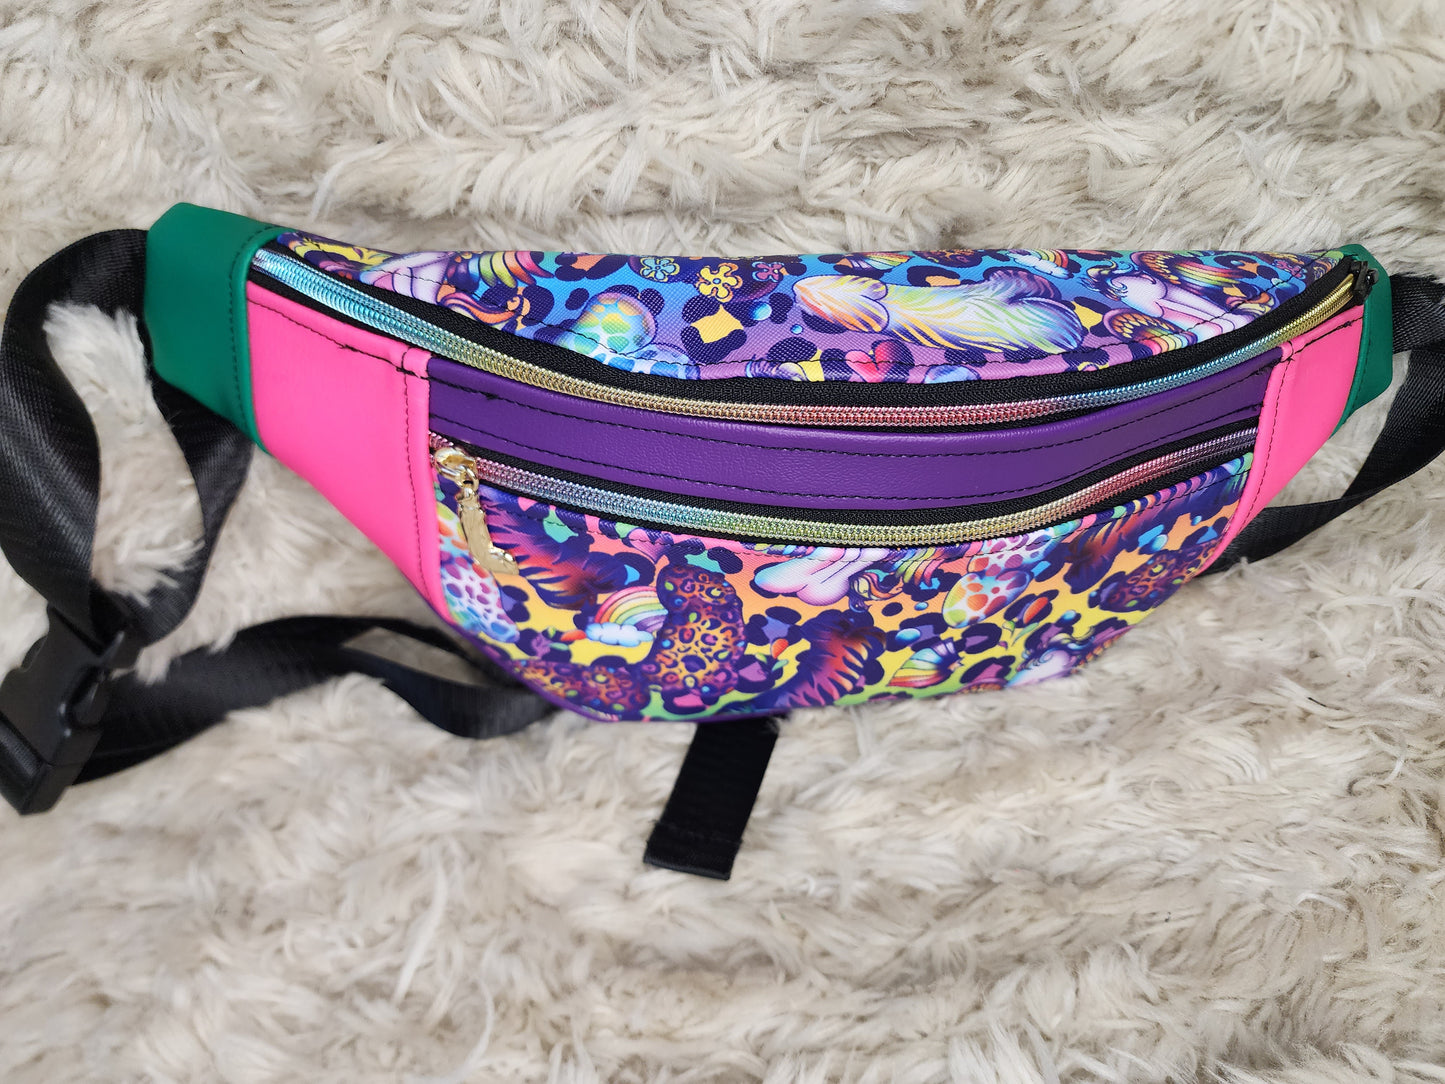 Lisa peen *Adult content* fanny pack